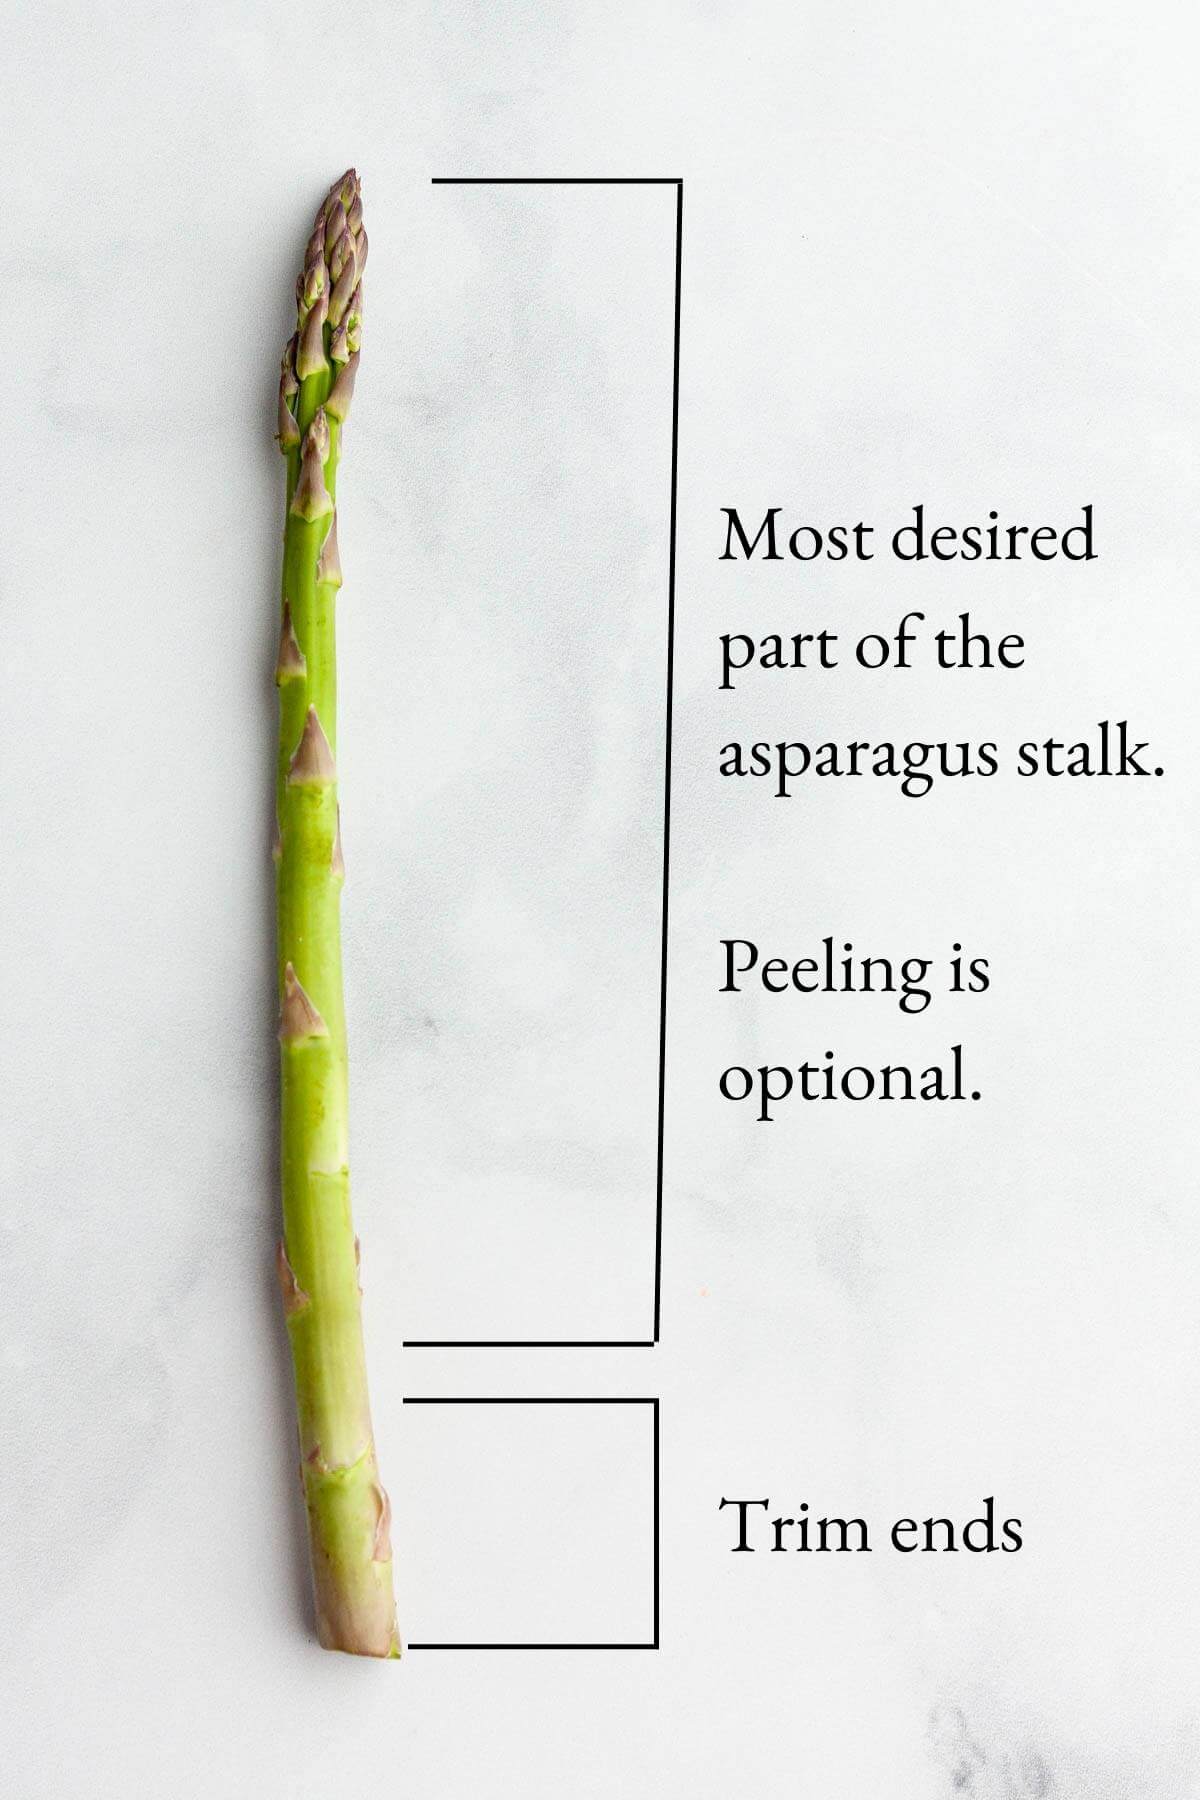 single asparagus stalk on counter with text highlighting the edible parts of the asparagus